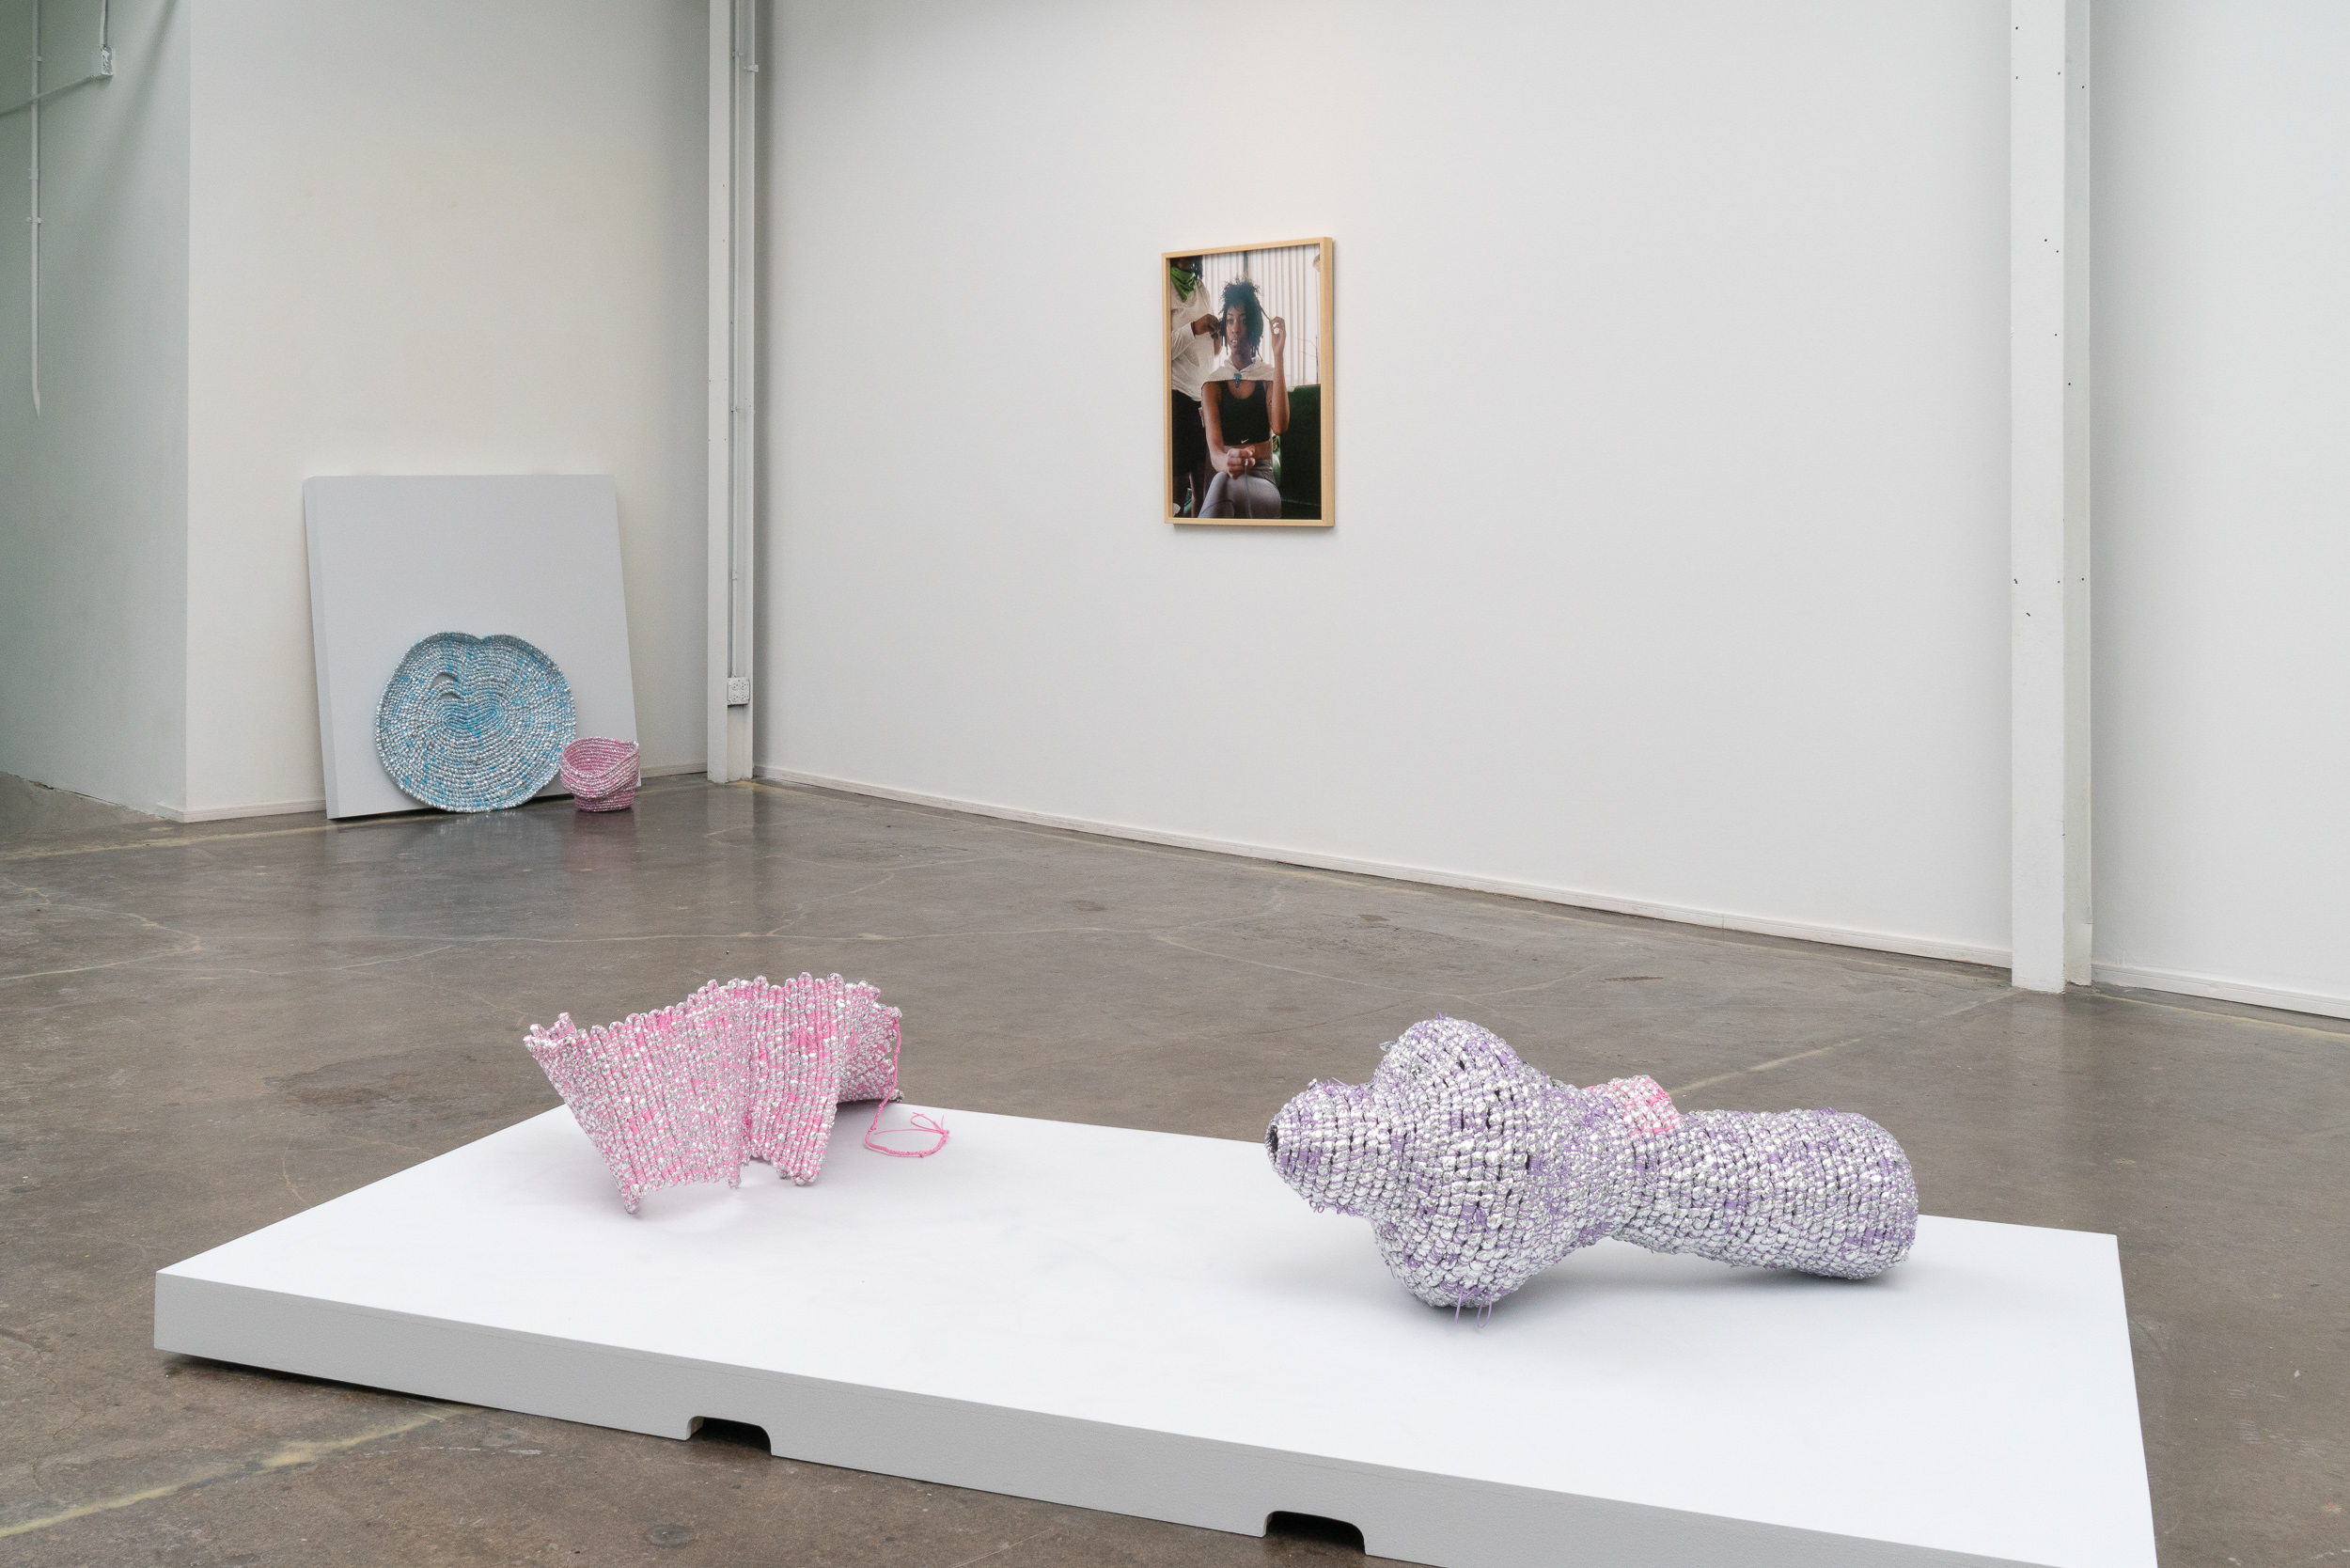 Image: Installation view of Chicago Artists Coalition’s Repository and Repertoire. José Santiago Pérez's sculptural pieces Un/Burden (so you may release), 2020, and Un/Burden (so you may restore), 2020, sit in the foreground on a white exhibition plinth. The piece on the left is composed of light-pink coiled emergency blankets and plastic lacing. The piece on the right is composed of silver and purple emergency blankets and plastic lacing. In the background Jazmine Harris' self-portrait Untitled is exhibited on the wall. To the left of Harris' piece, is Perez's, Un/Burden (so you may continue), 2020: two rimmed sculptural light pink and aqua-marine sculptural forms composed of the same materials. Photo courtesy of the artist and curator.